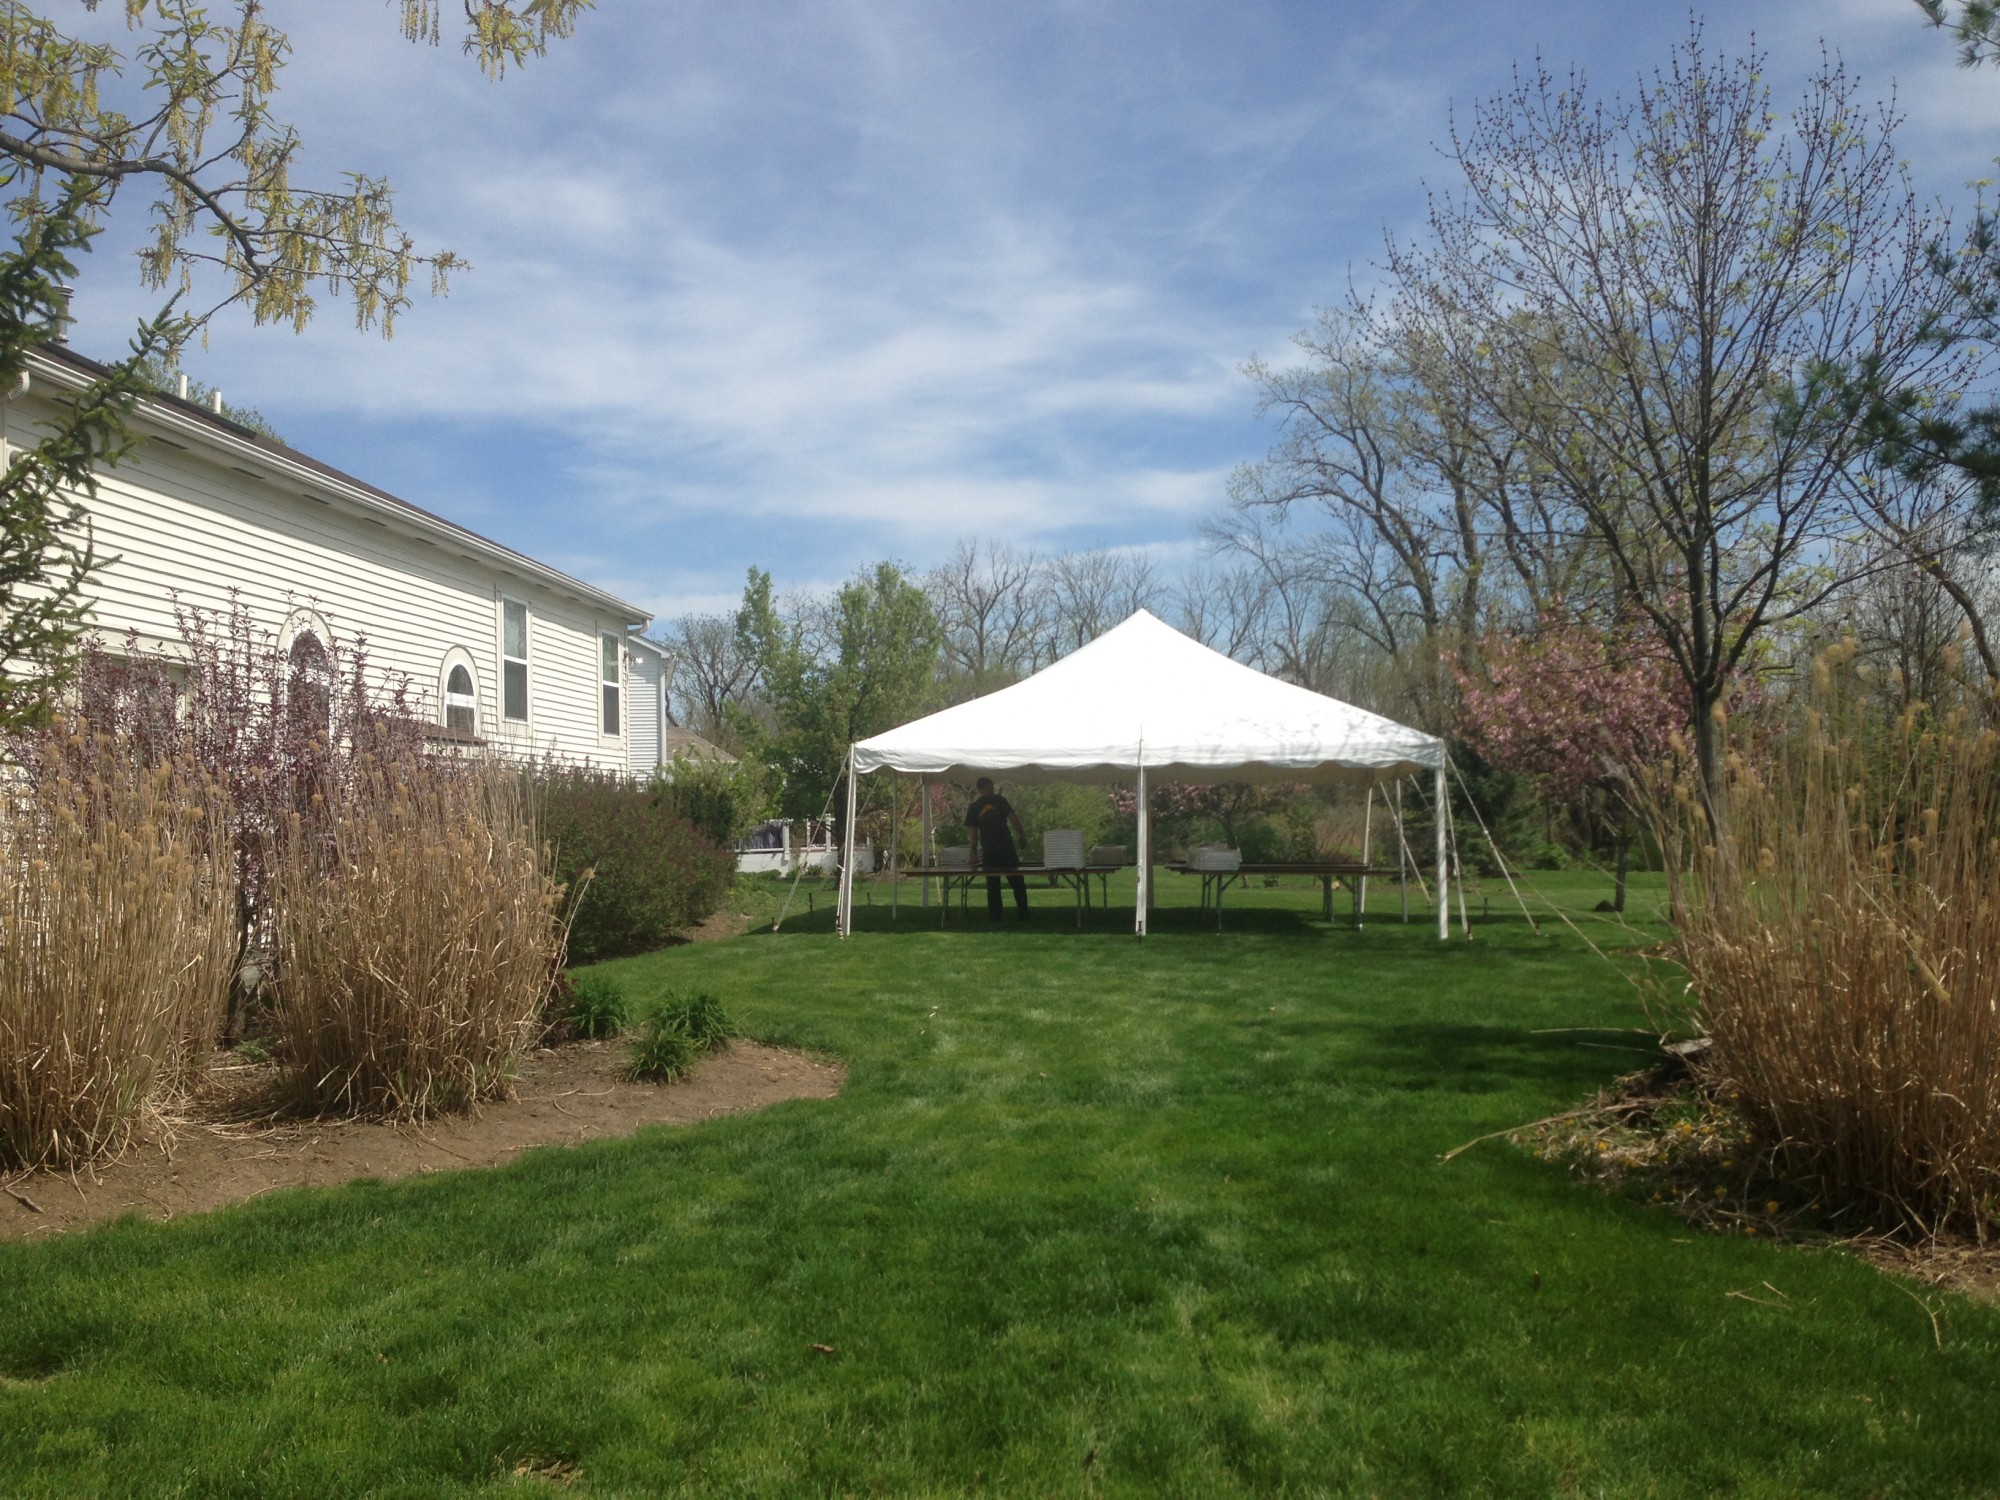 /upload/images/backyard_events/20x20_pole_tent